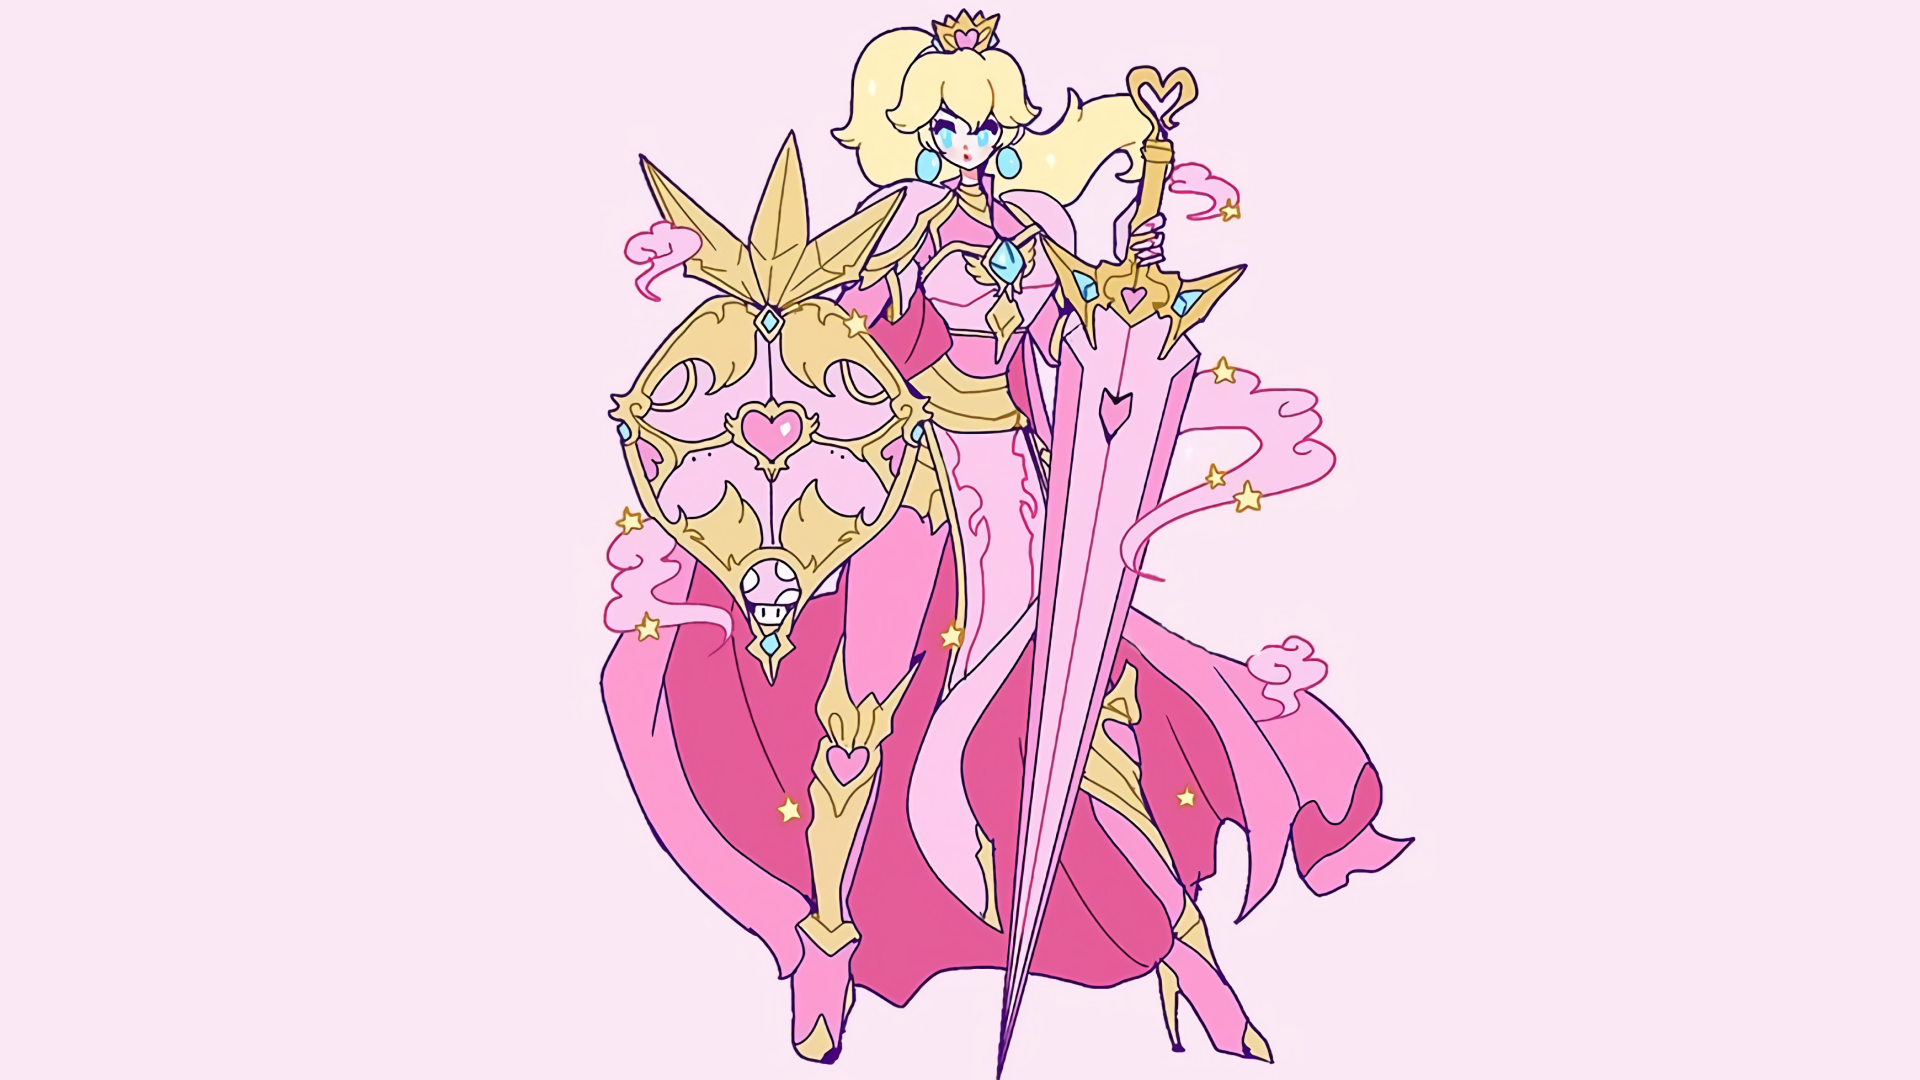 Anime 1920x1080 Princess Peach Super Mario Bros. Super Mario sword shield knee-high boots crown earring blue eyes armor pink background high heels high heeled boots cape Super Smash Brothers blonde video games video game girls